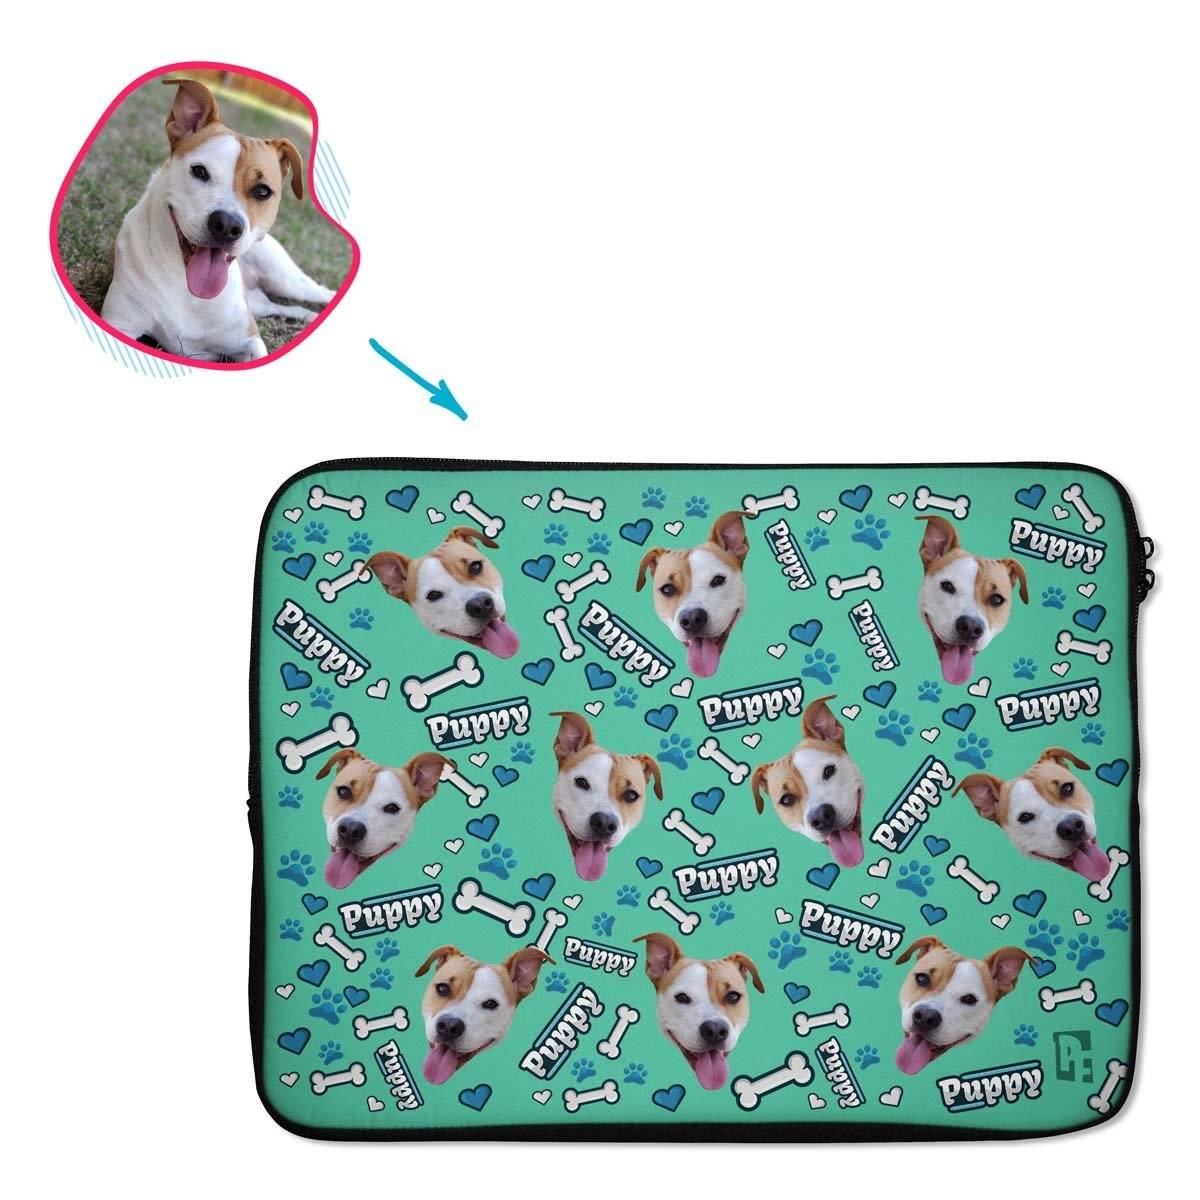 Puppy Personalized Laptop Sleeve